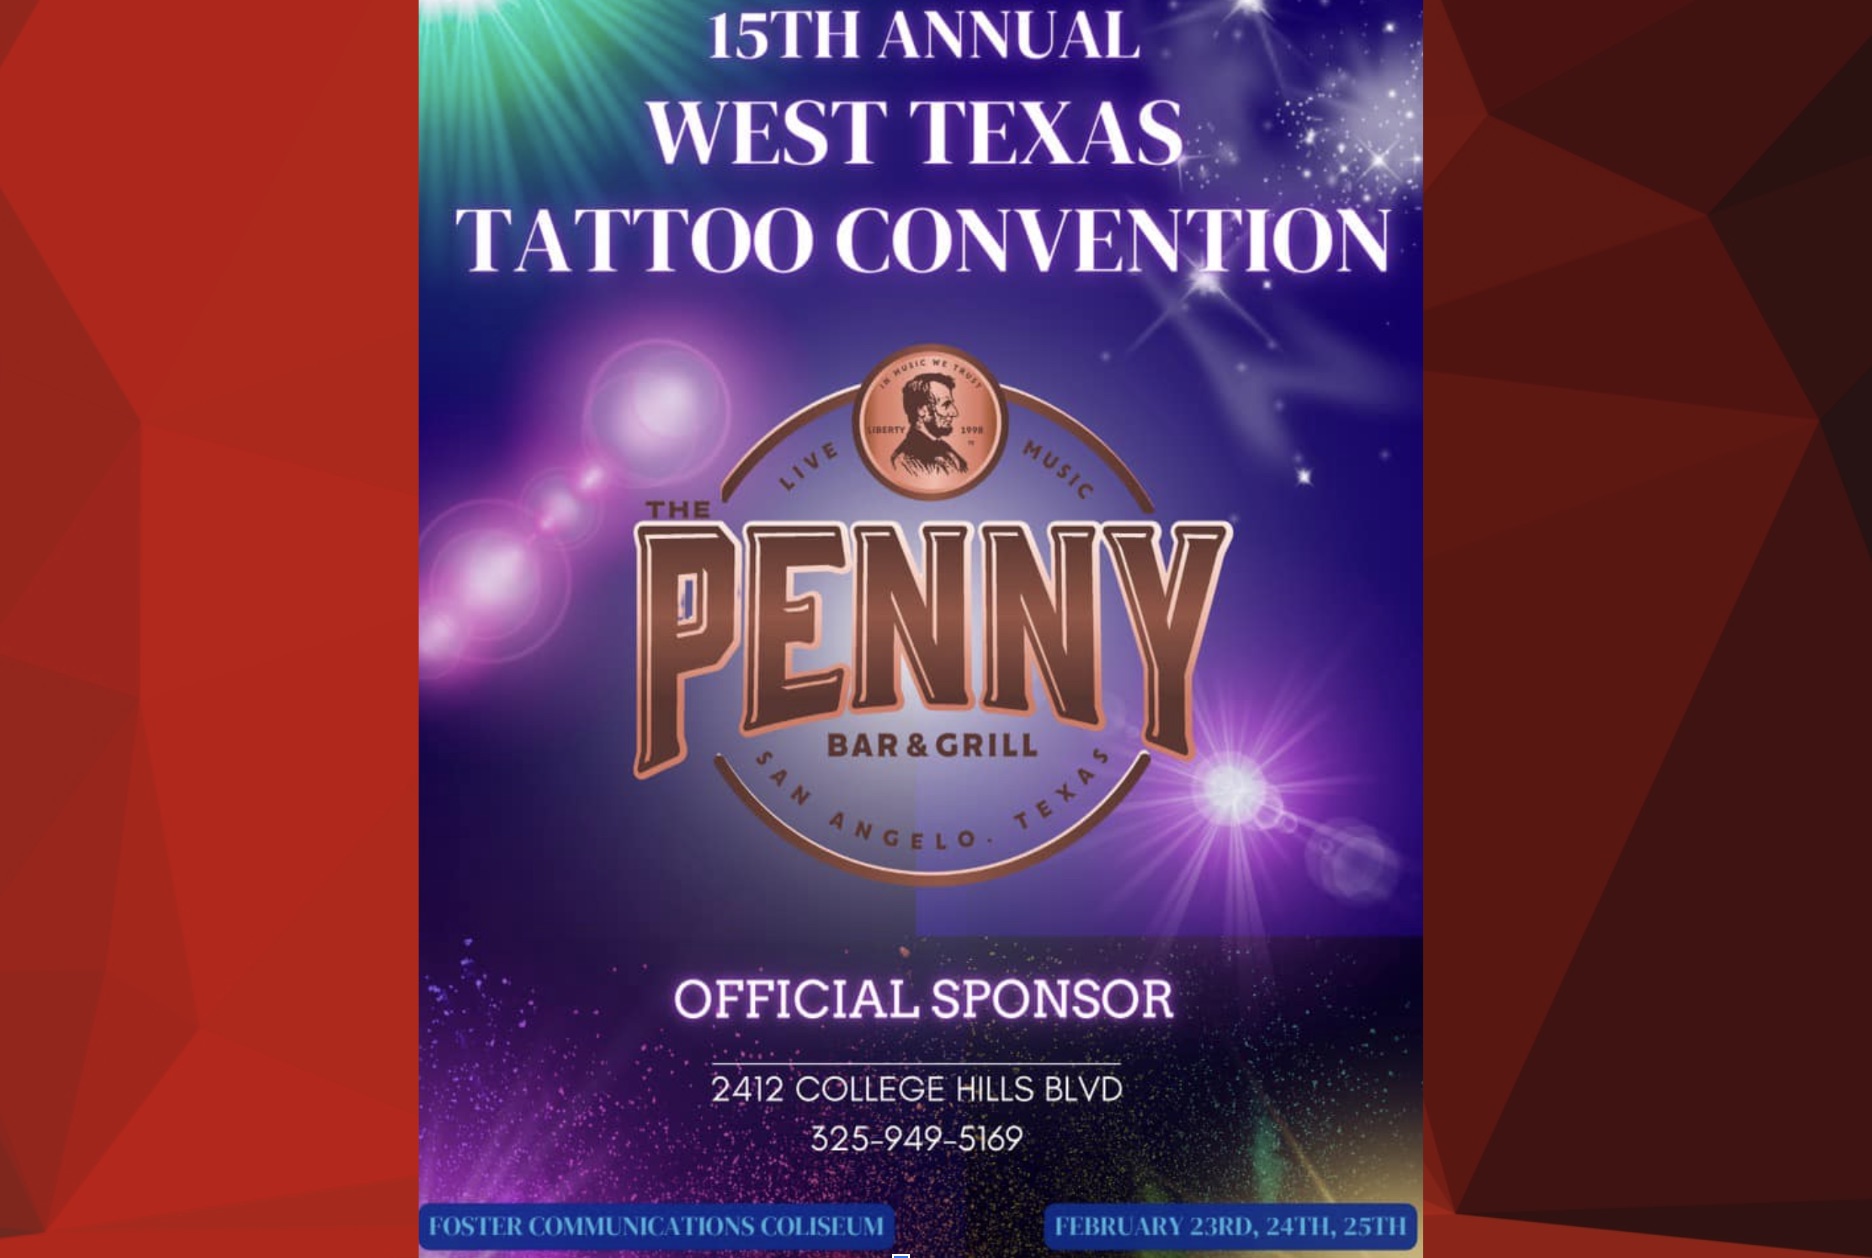 Penny Tap House Sponsor of the Tattoo Convention